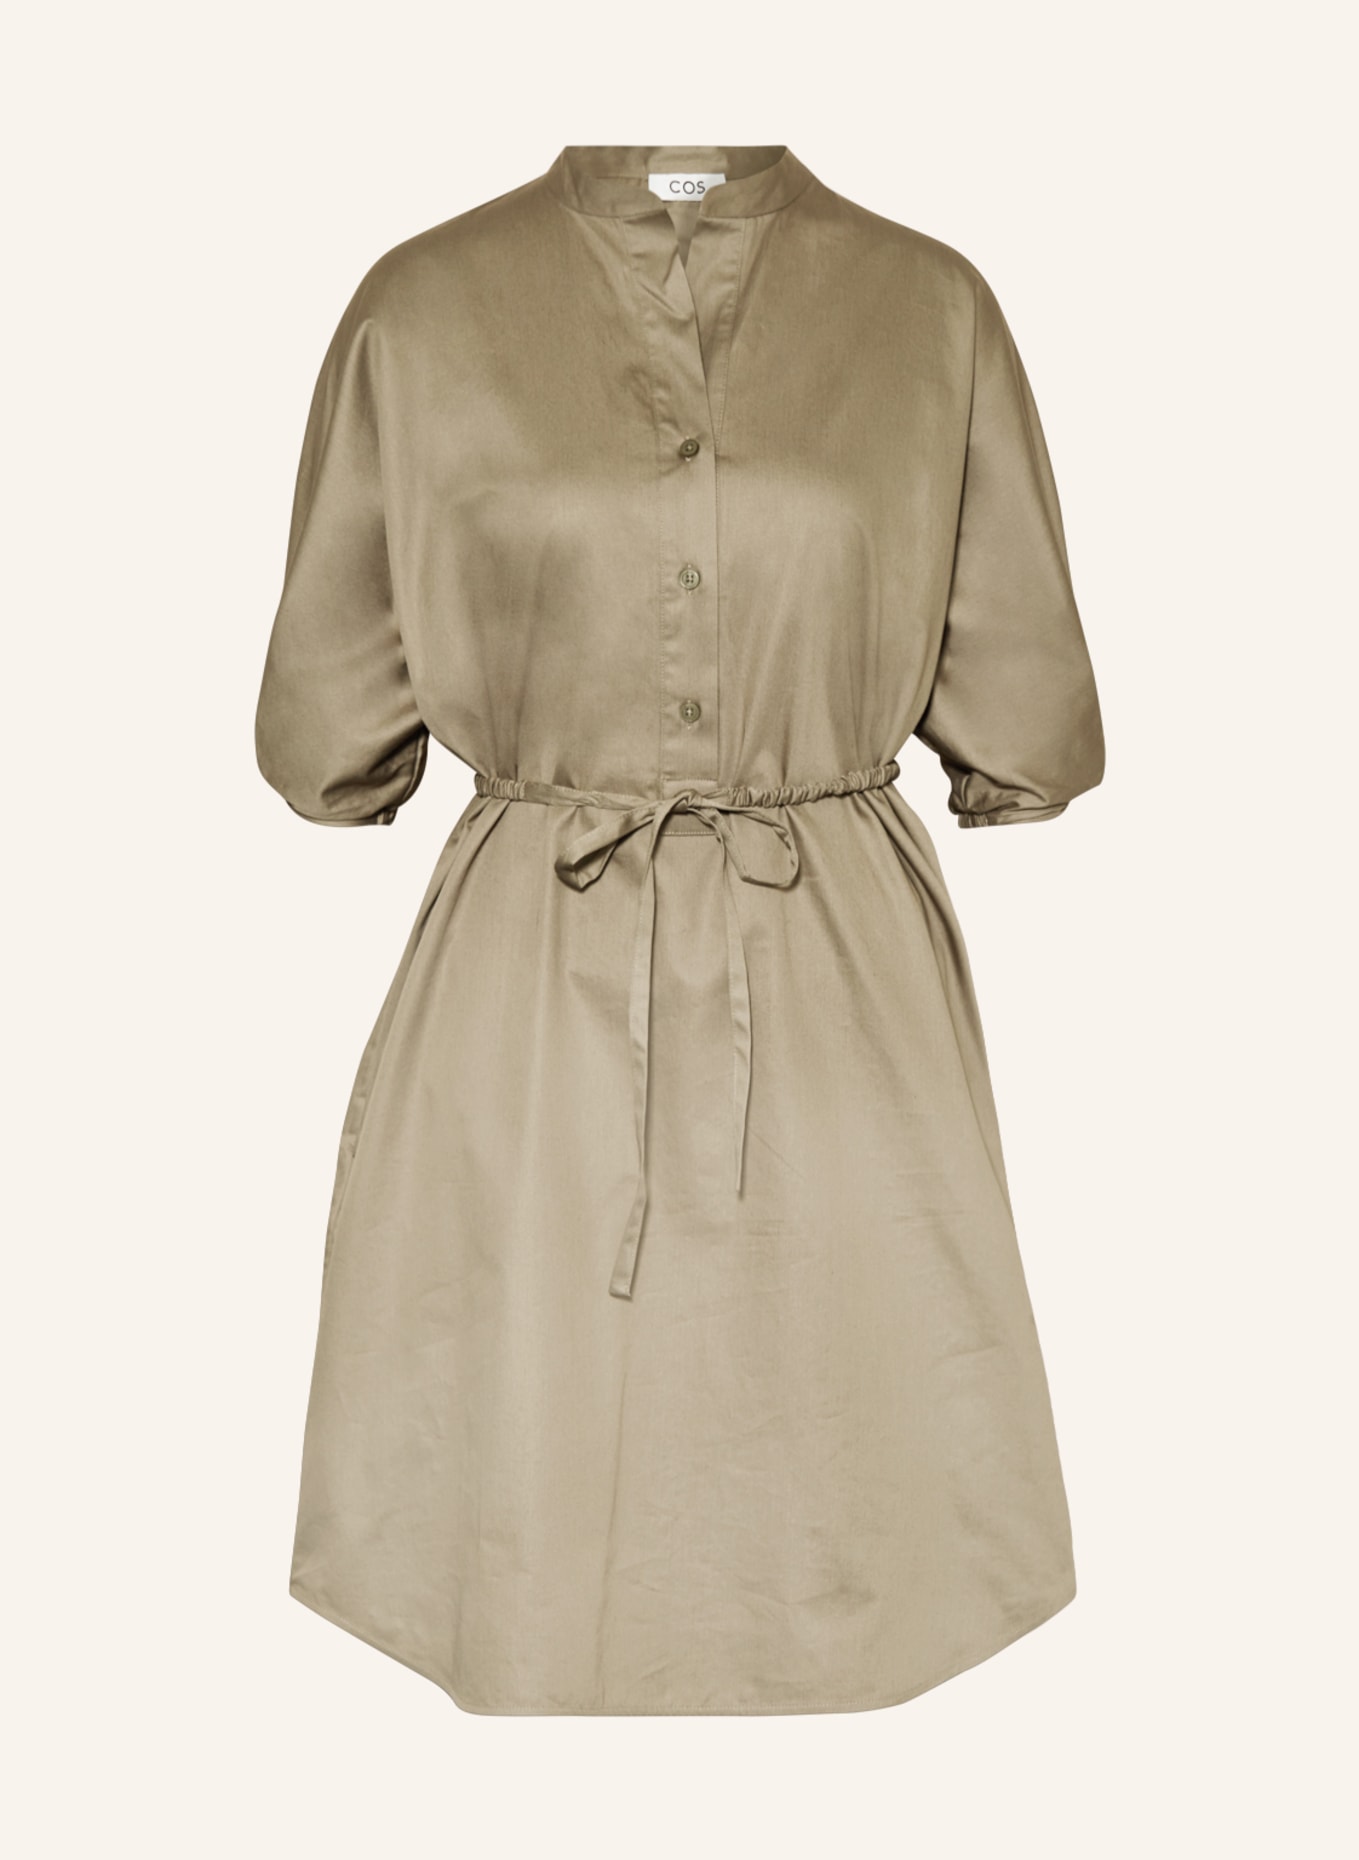 COS Dress with 3/4 sleeves in khaki